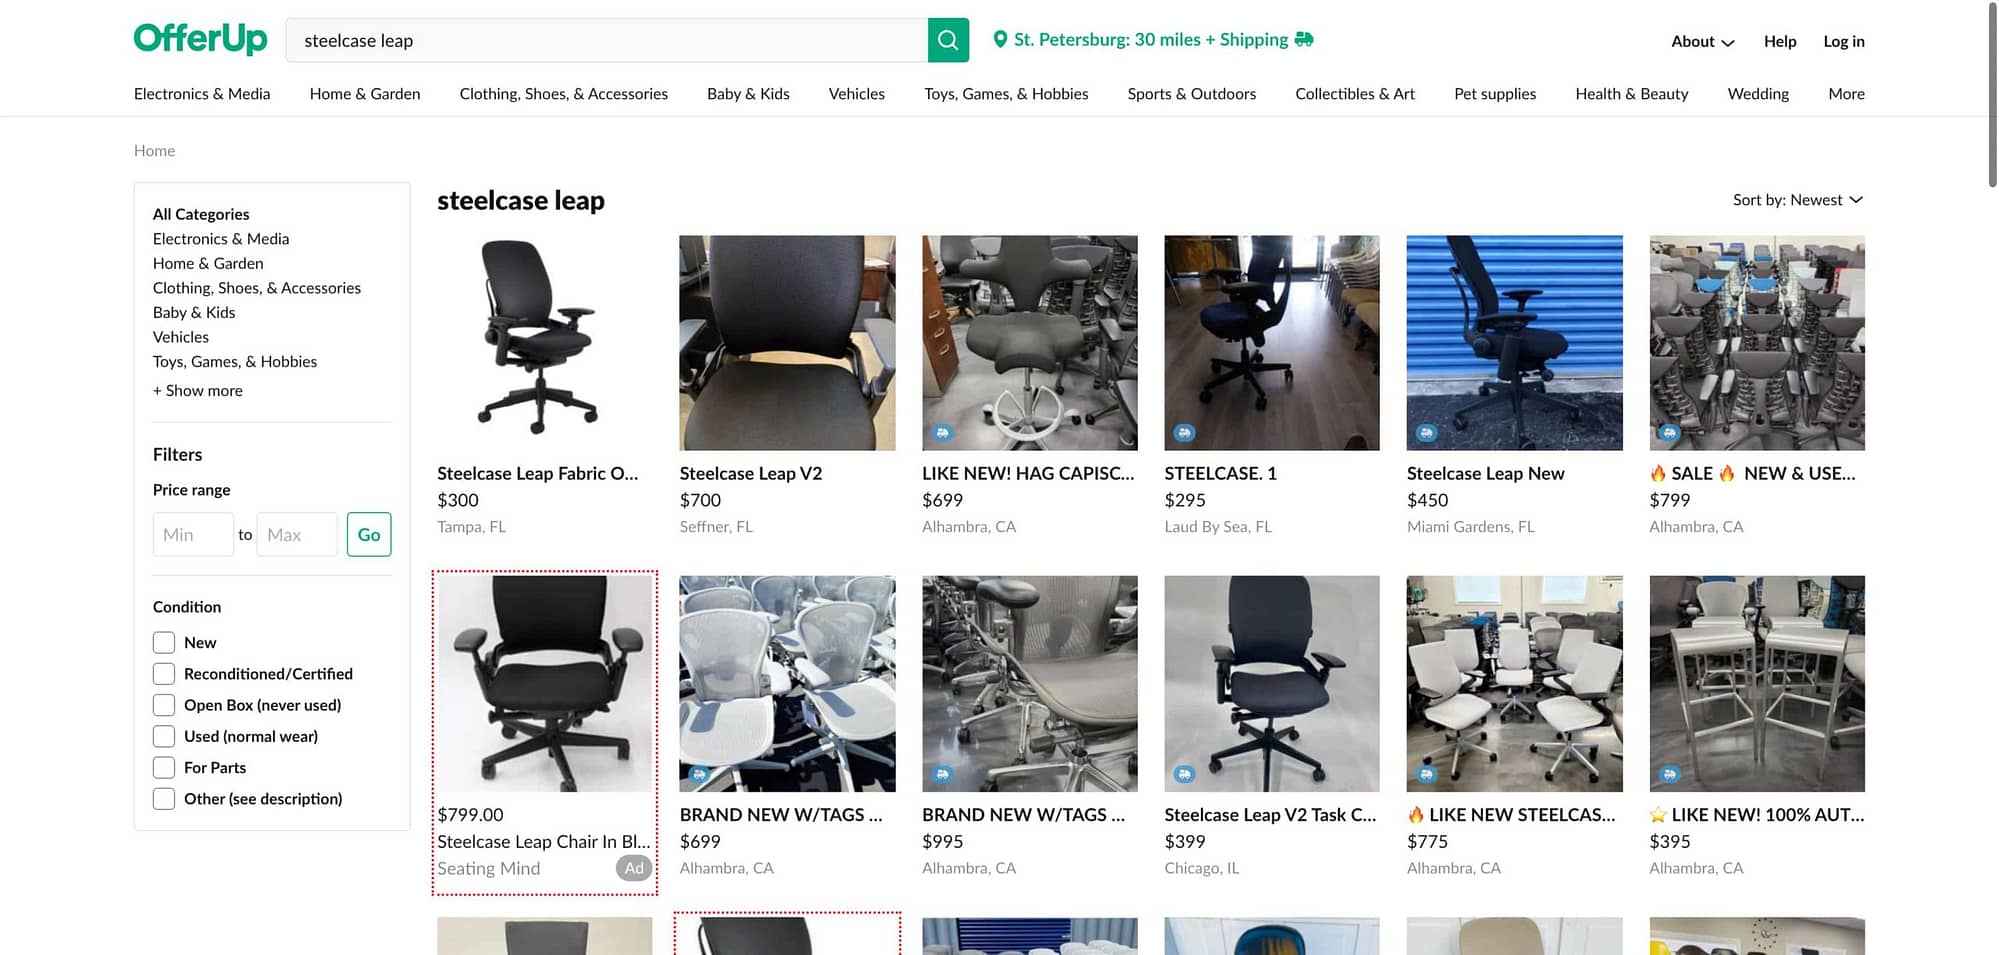 Steelcase Leap Offer Up Listings scaled